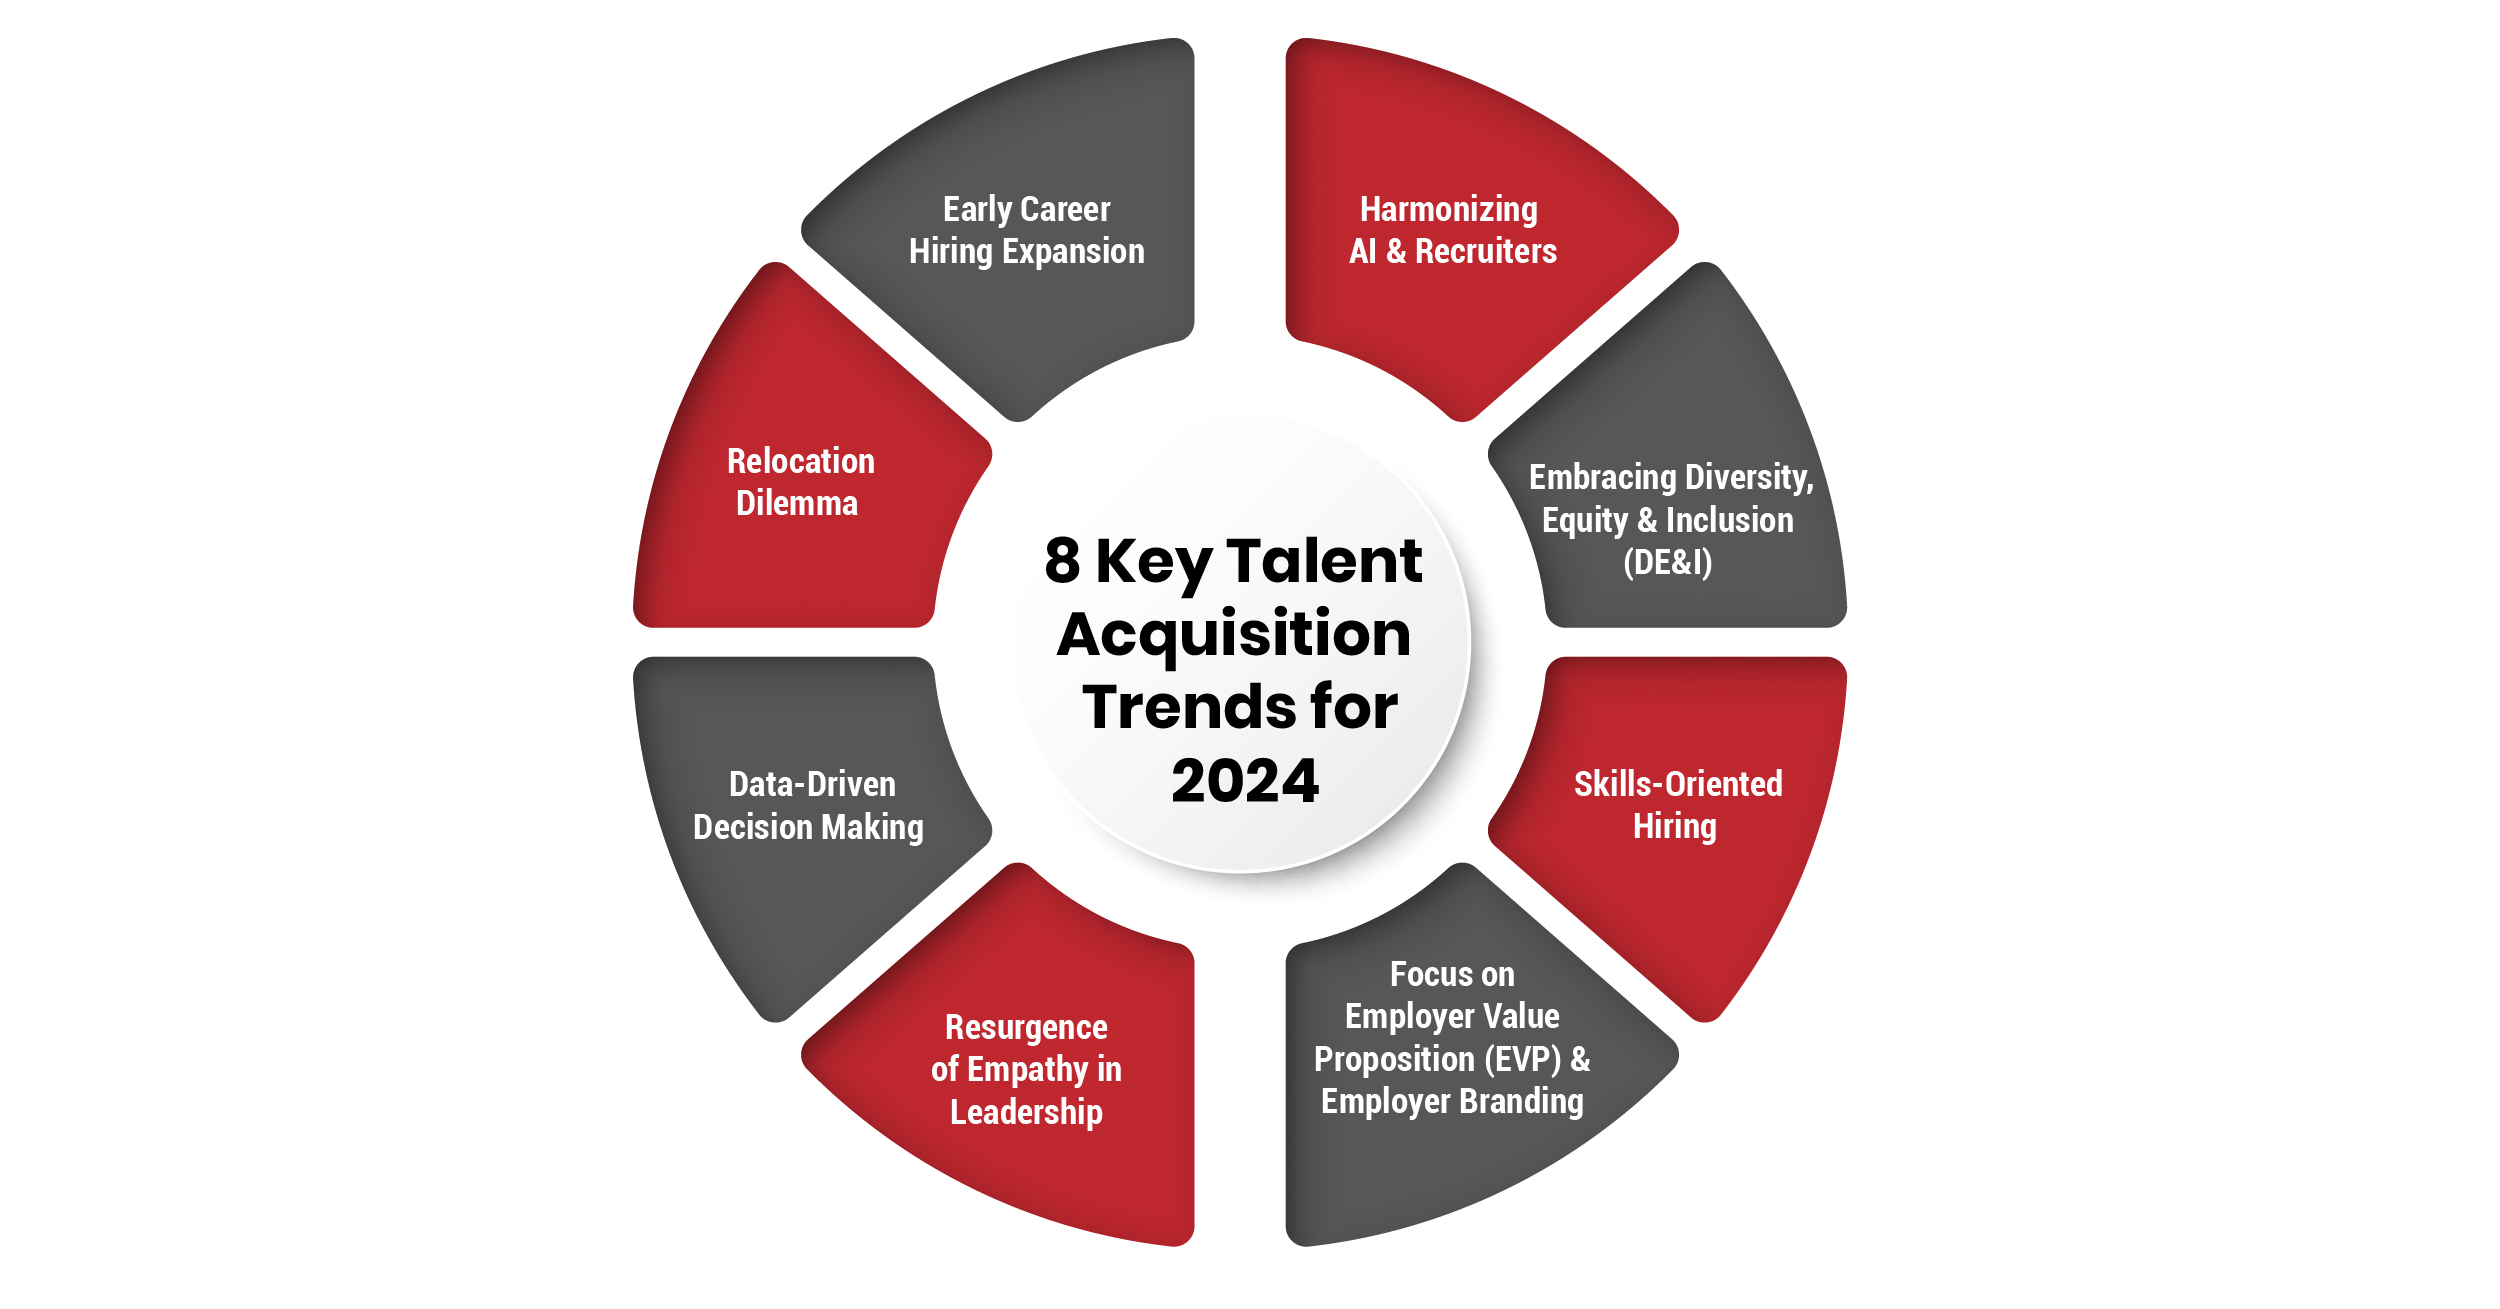 8 Key Talent Acquisition Trends for 2024